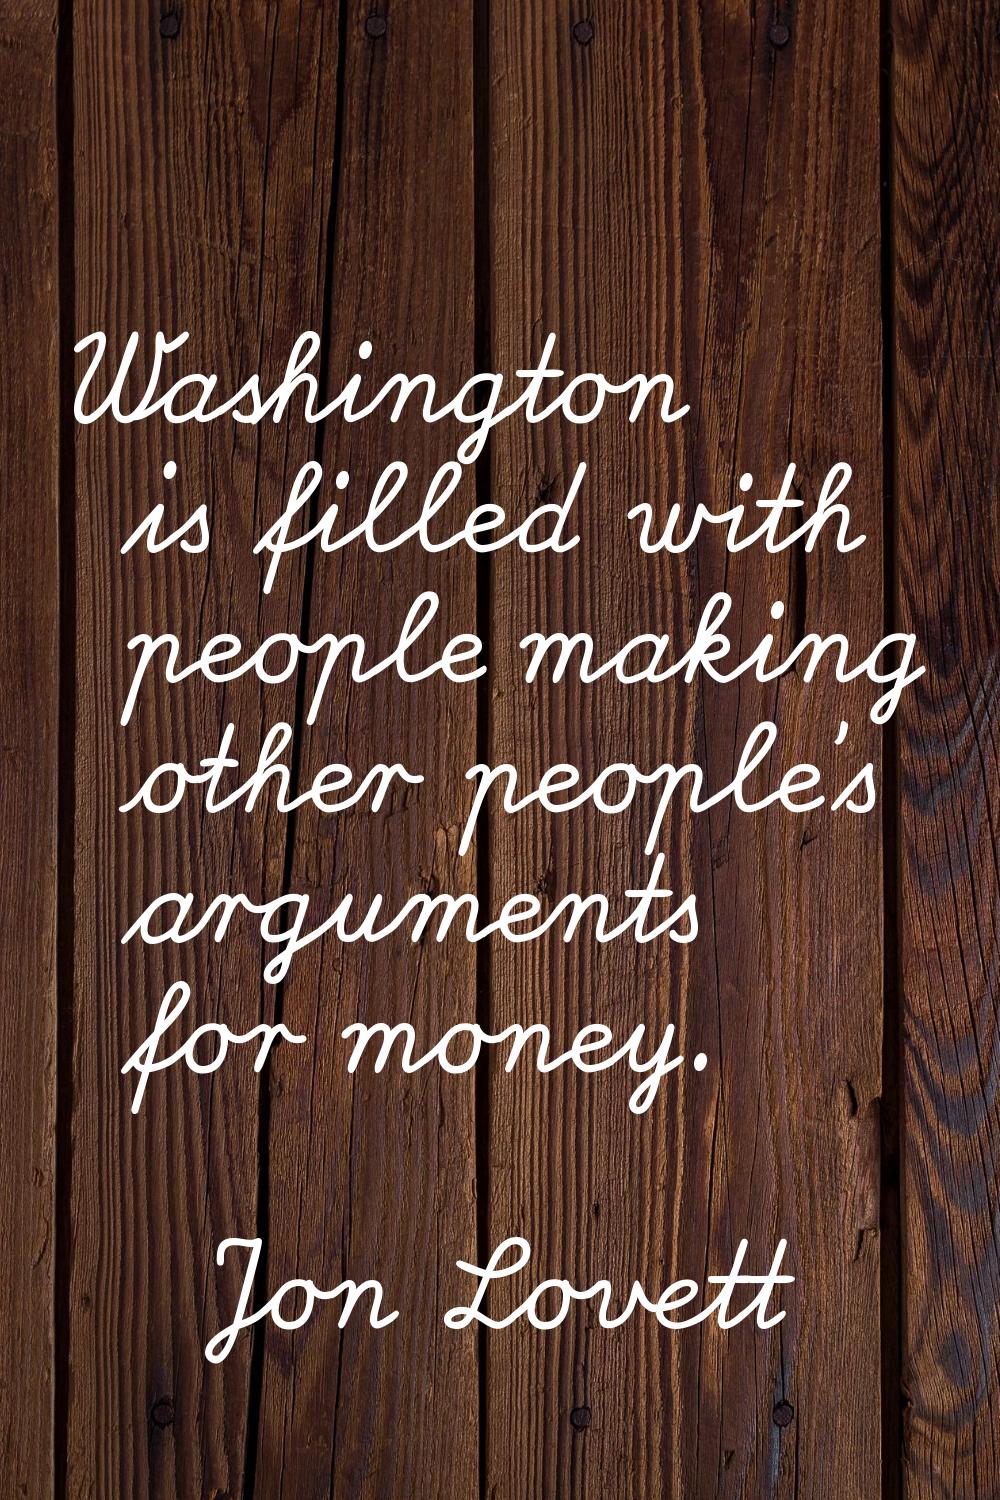 Washington is filled with people making other people's arguments for money.